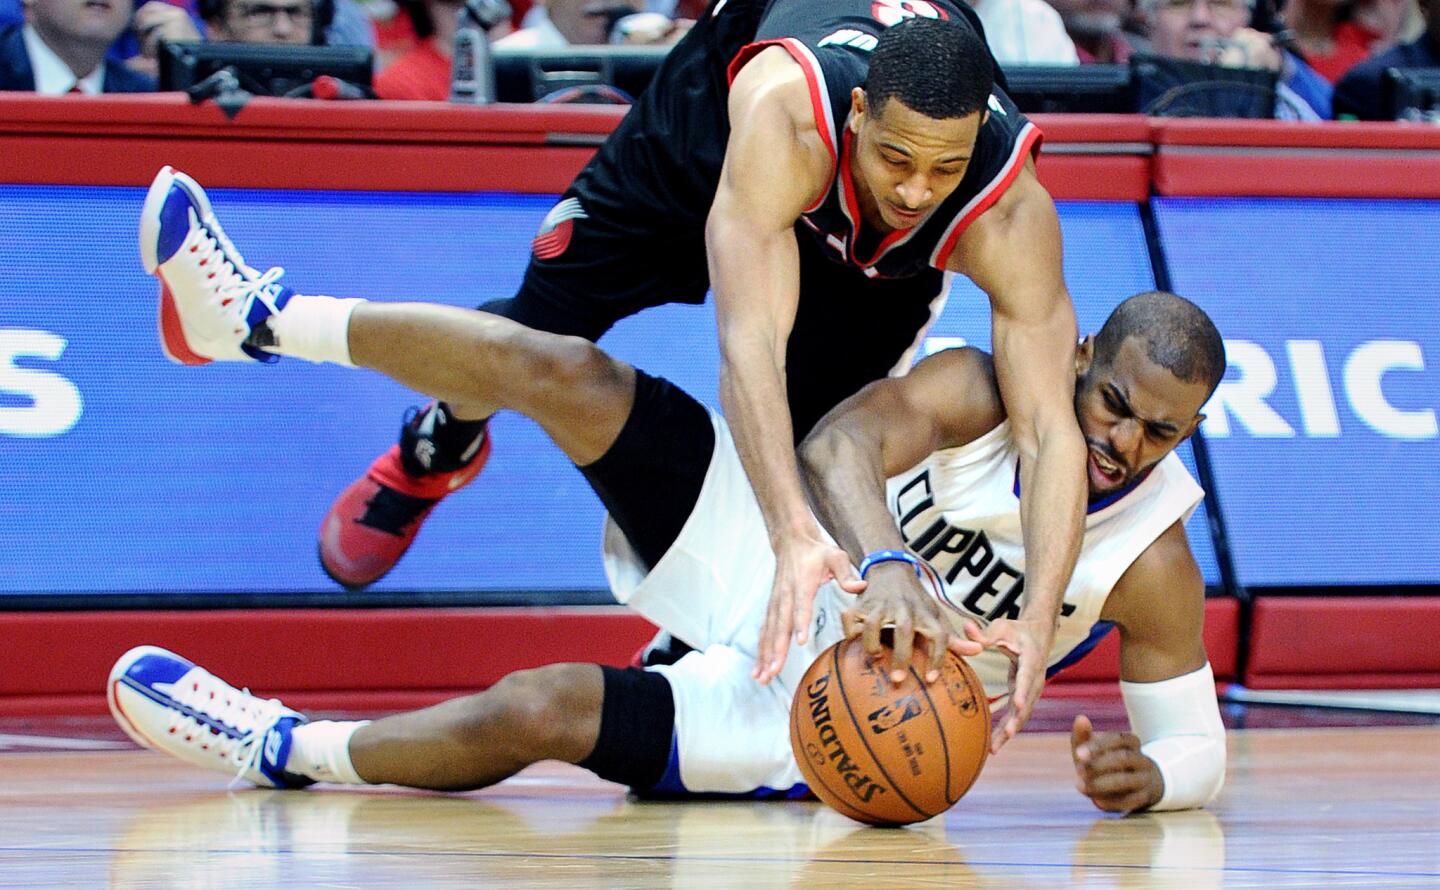 Clippers guard Chris Paul is fouled by Trail Blazers guard C.J. McCollum during a battle for the ball in the fourth quarter of Game 1.